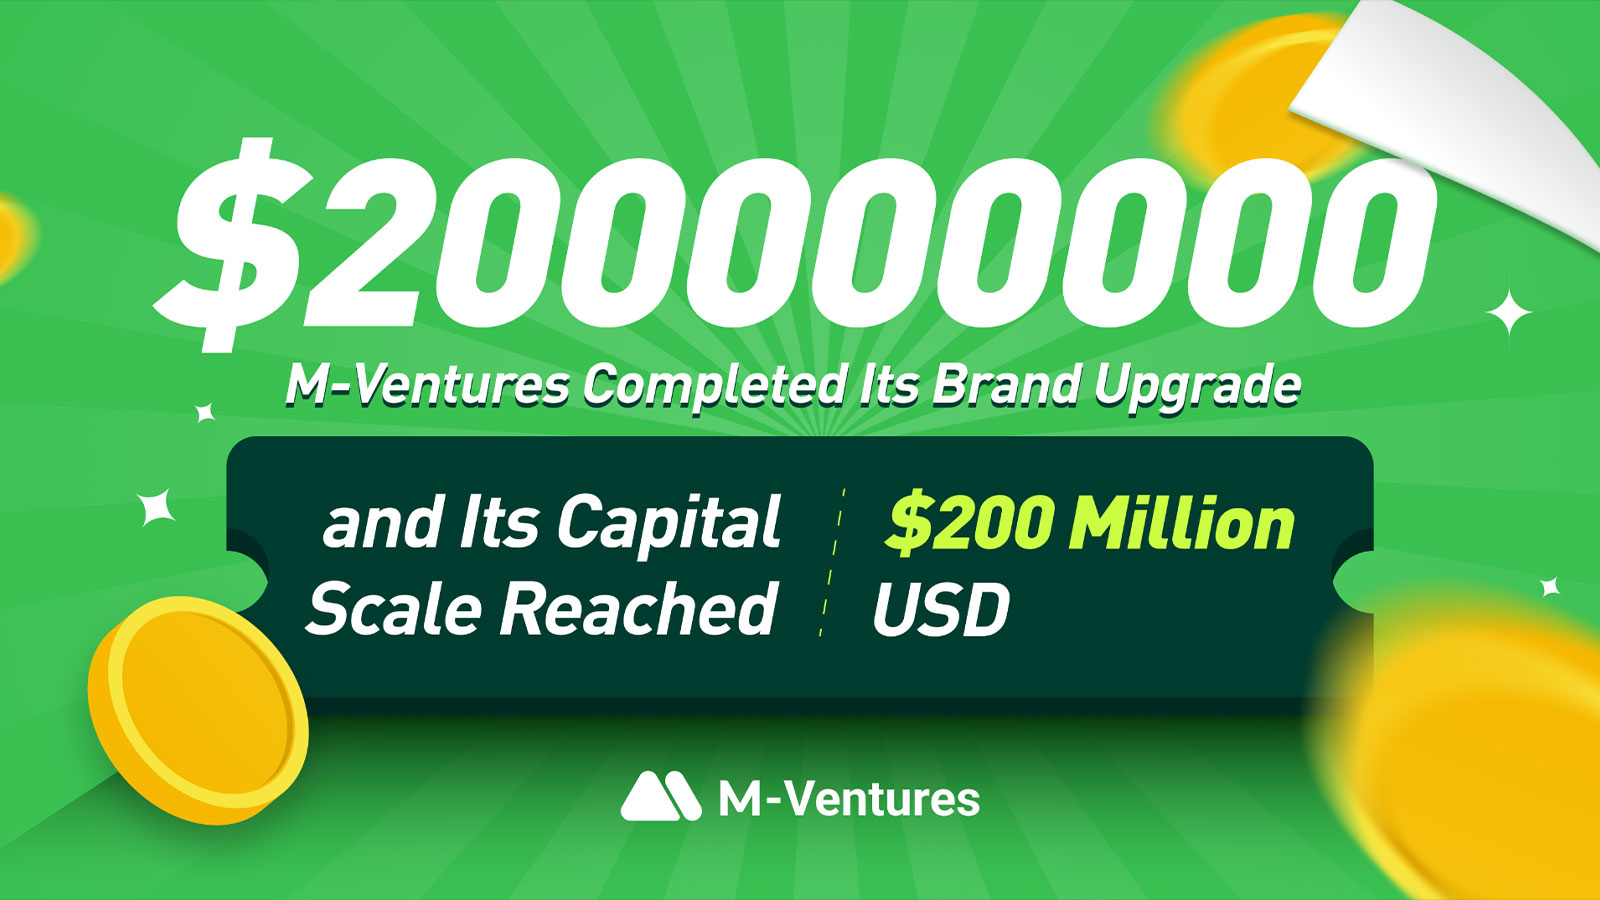 M-Ventures Under MEXC Completes Brand Upgrade, With Capital Scale Reaching $200M